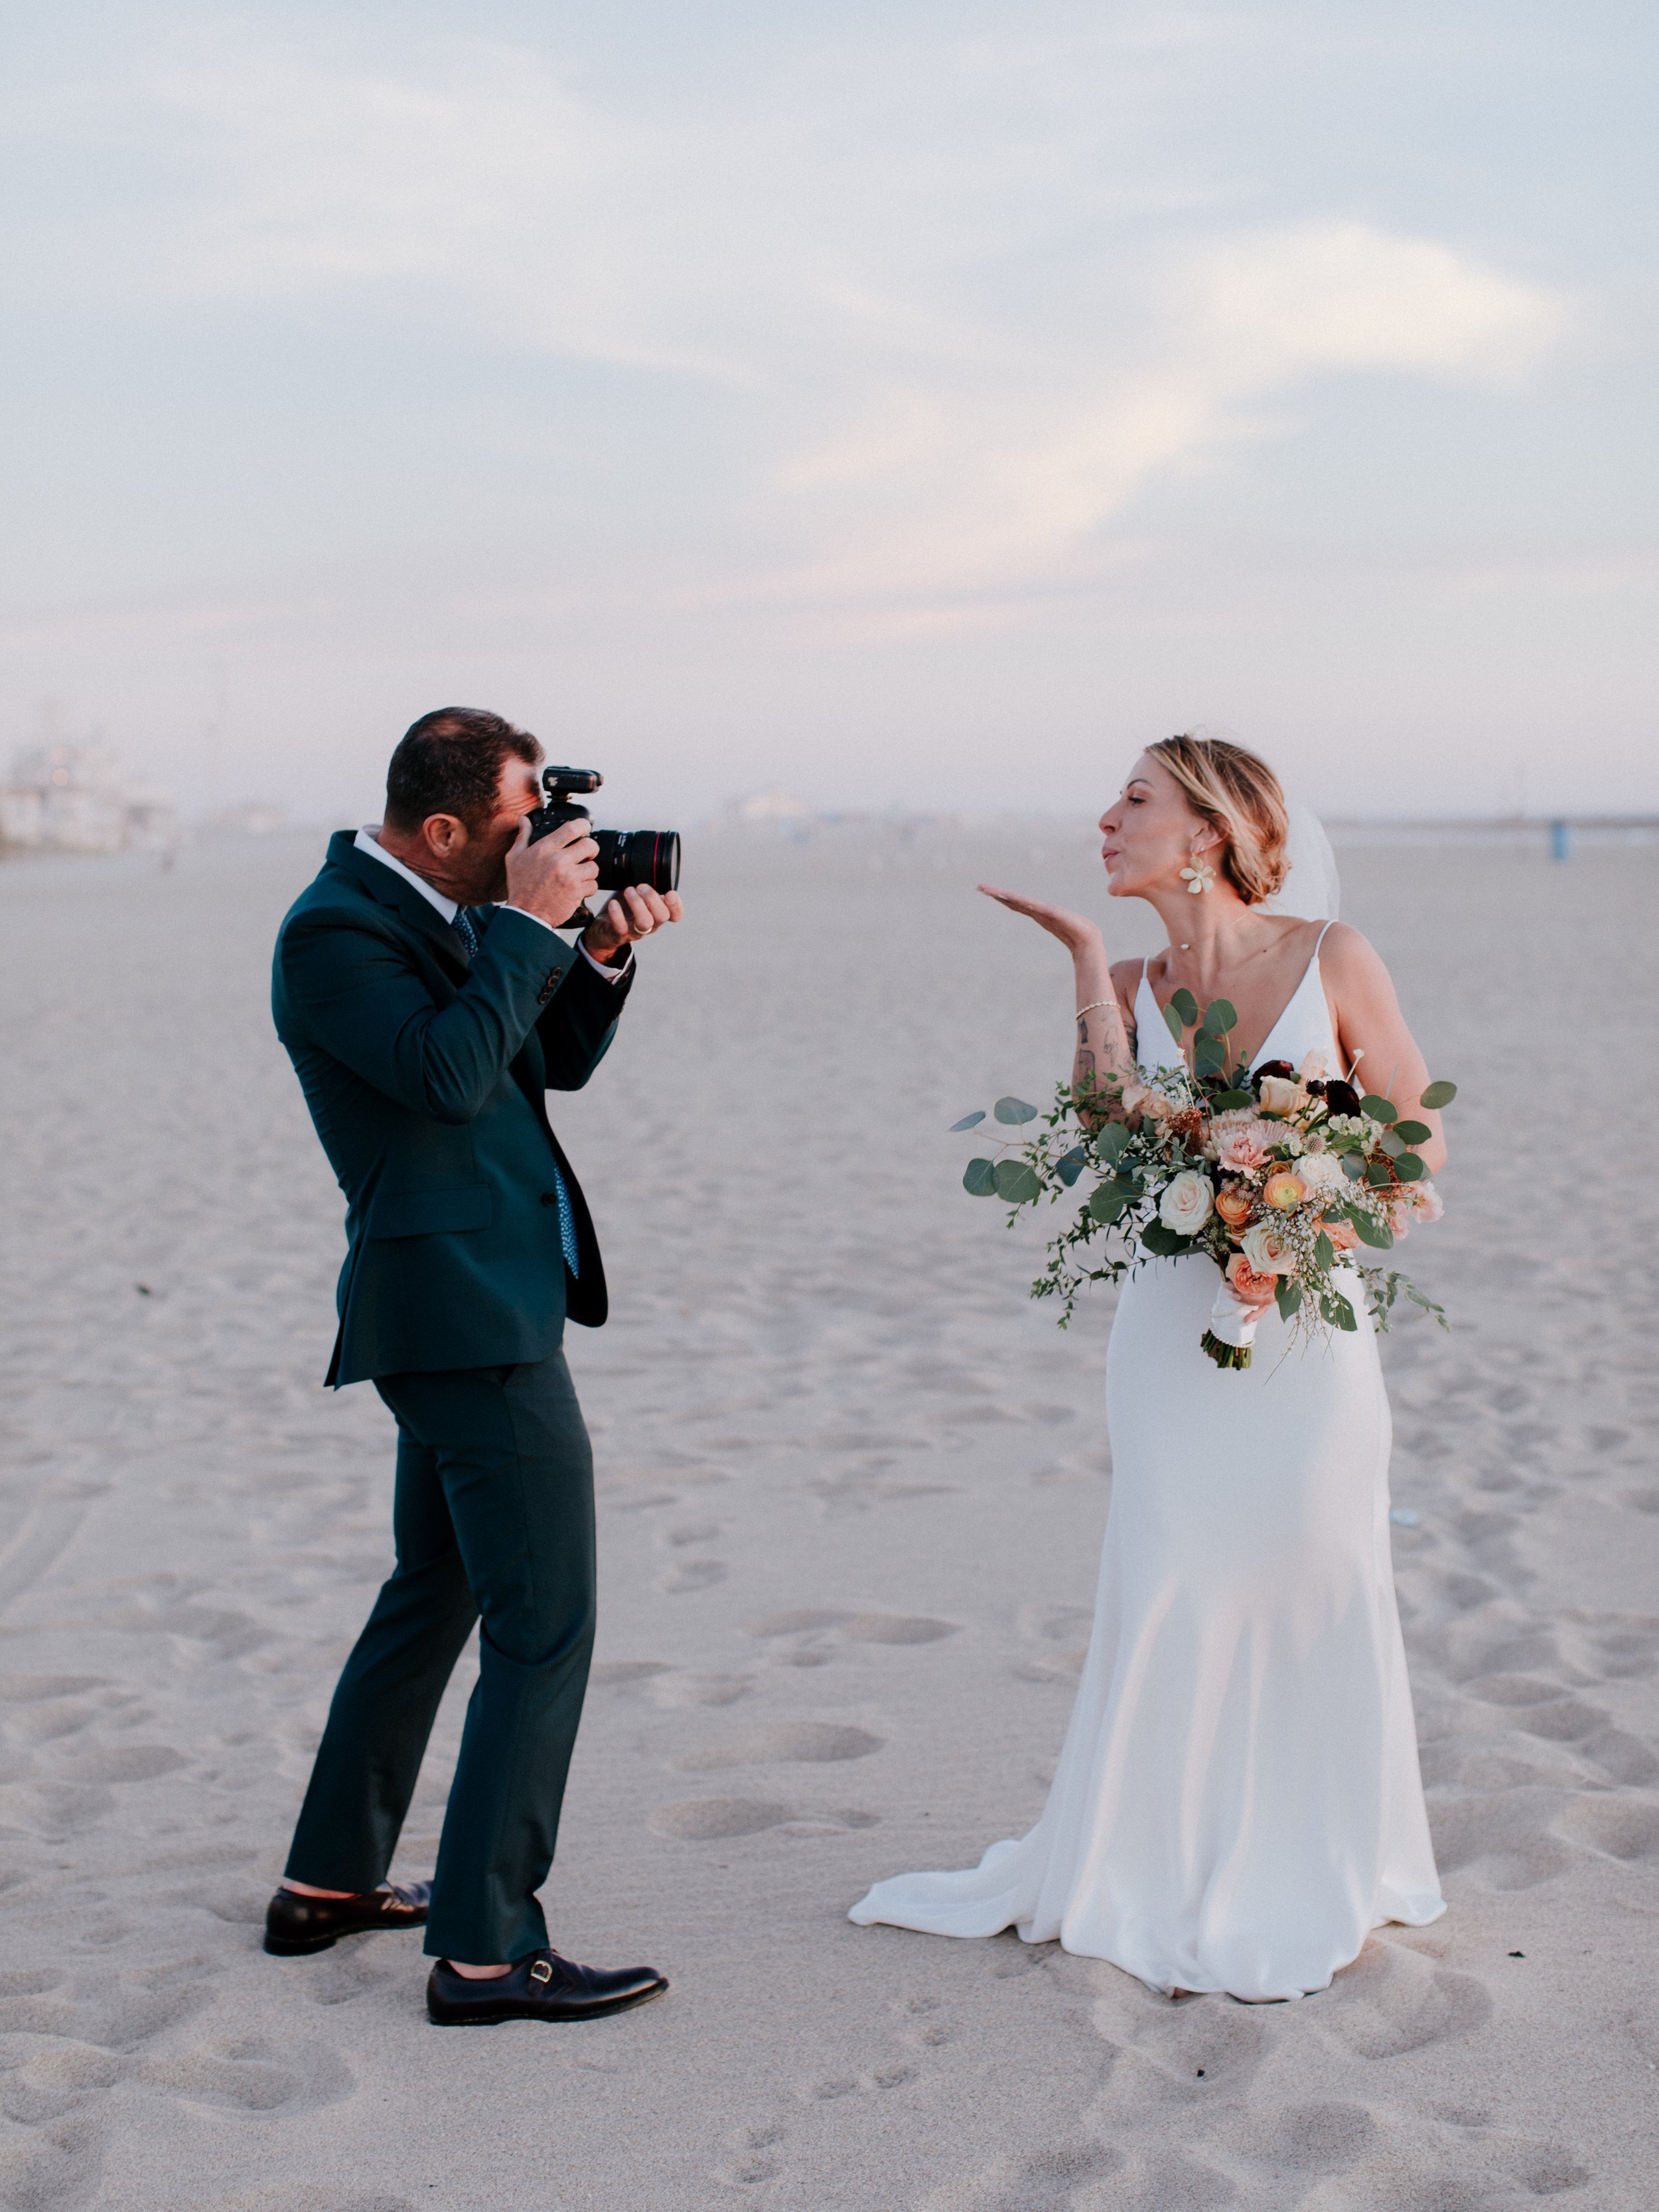 www.santabarbarawedding.com | Chris J. Evans | Paul Smith Suit | Groom Taking a Picture of the Bride on the Beach